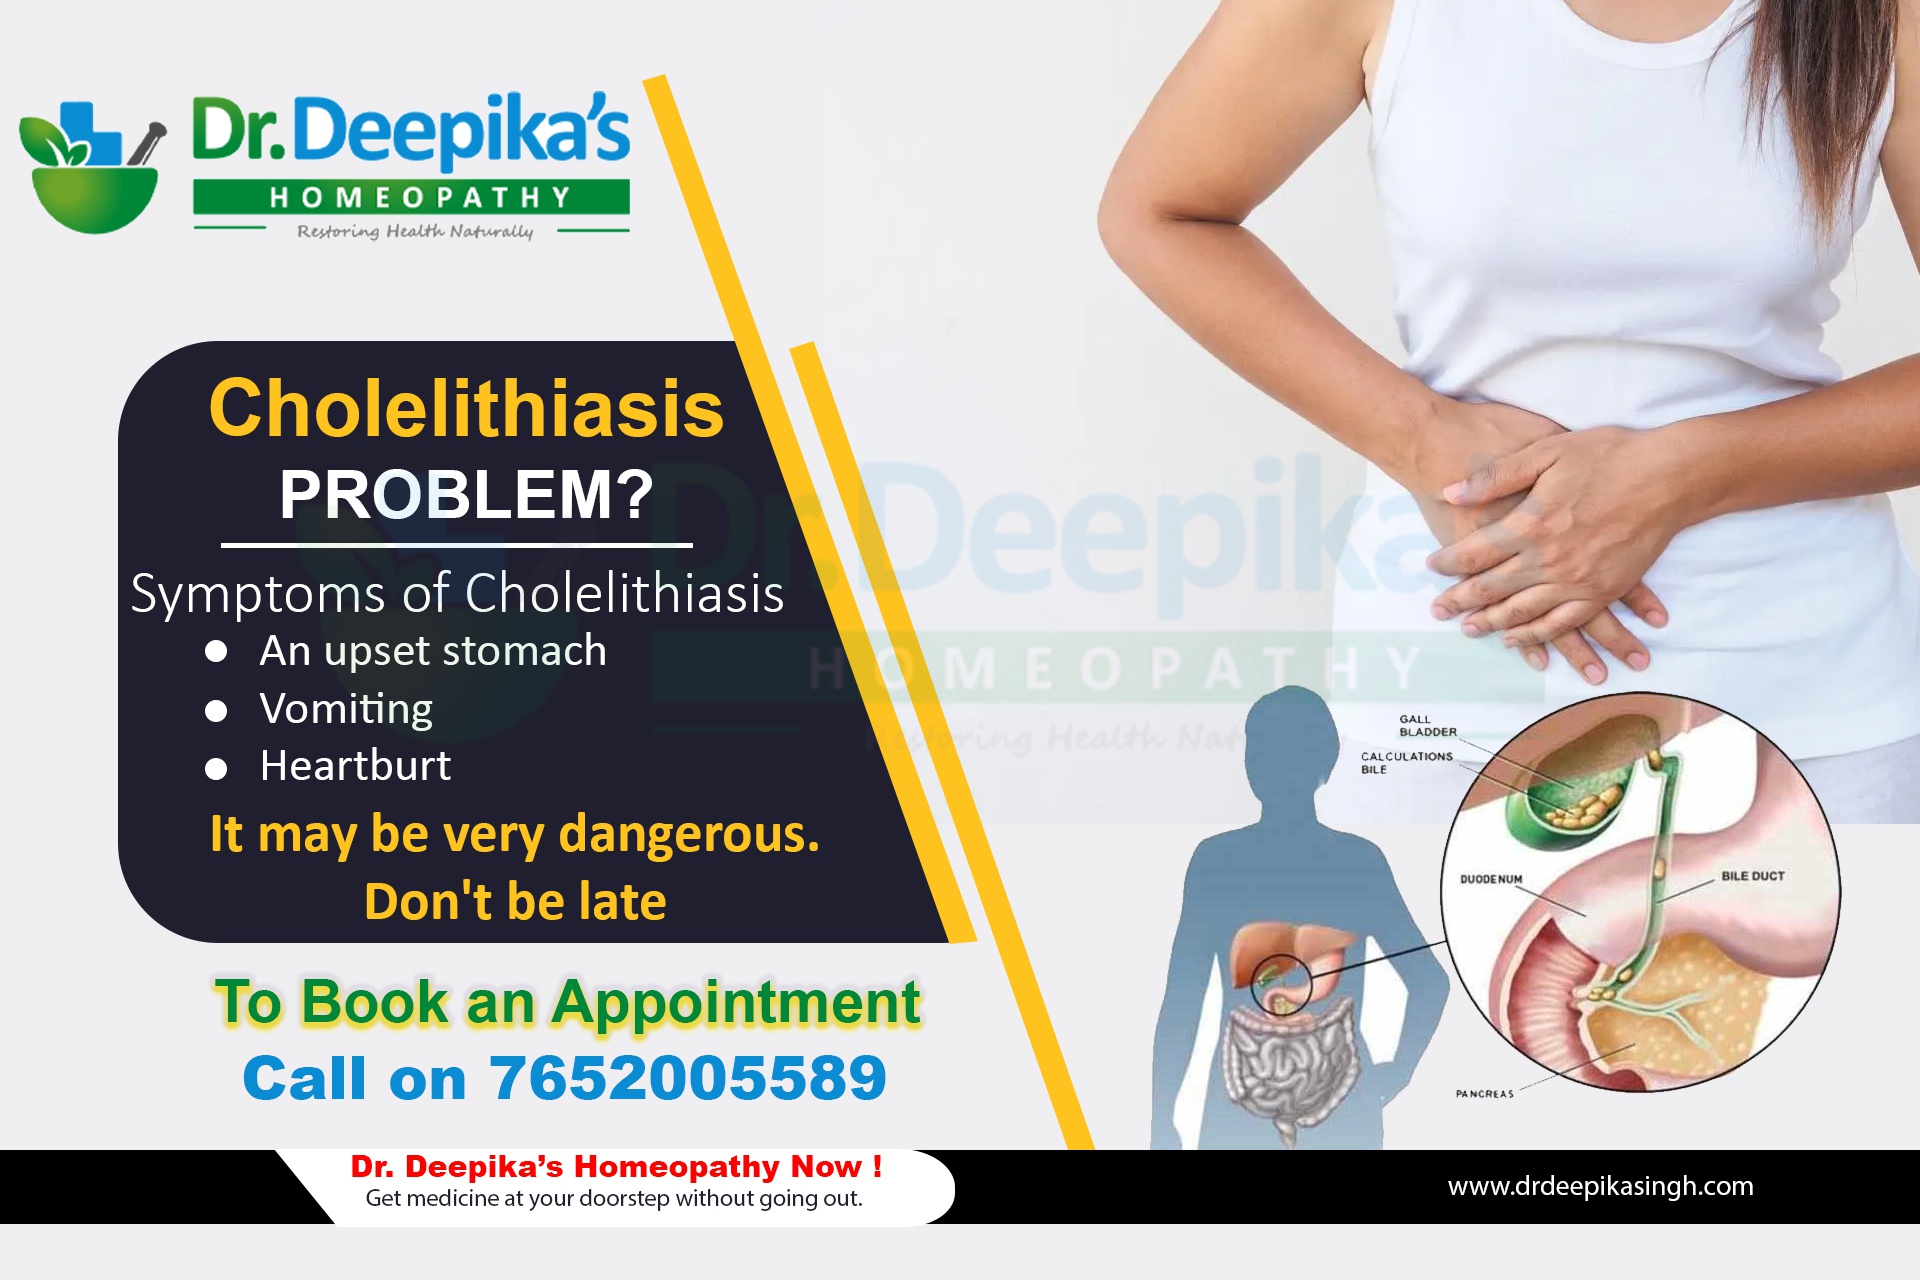 What is Cholelithiasis disorder or the presence of gallstones? & How it can cure naturally using homeopathy?